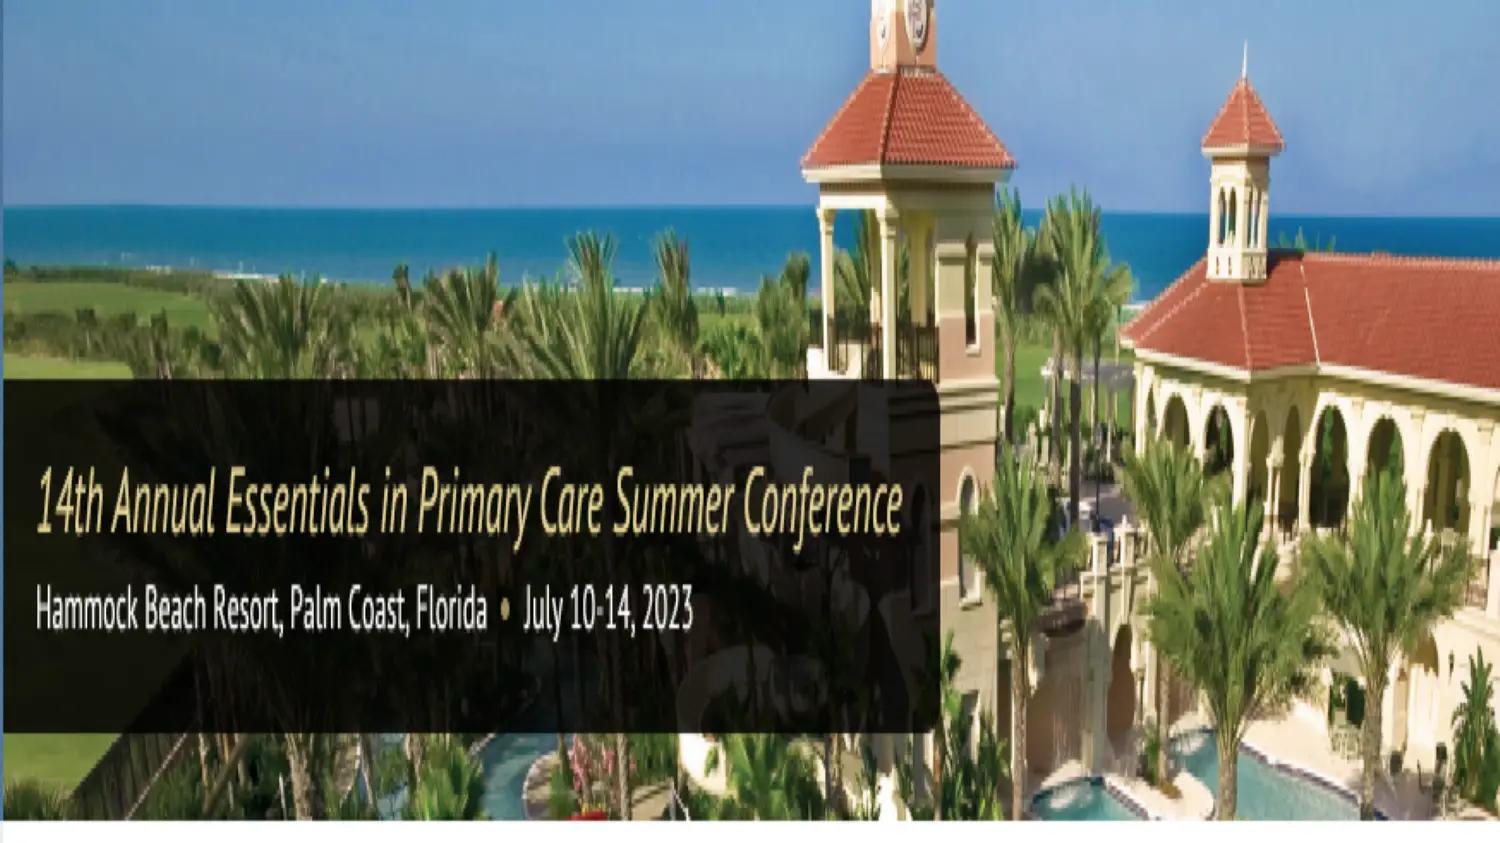 14th Annual Essentials in Primary Care Summer Conference